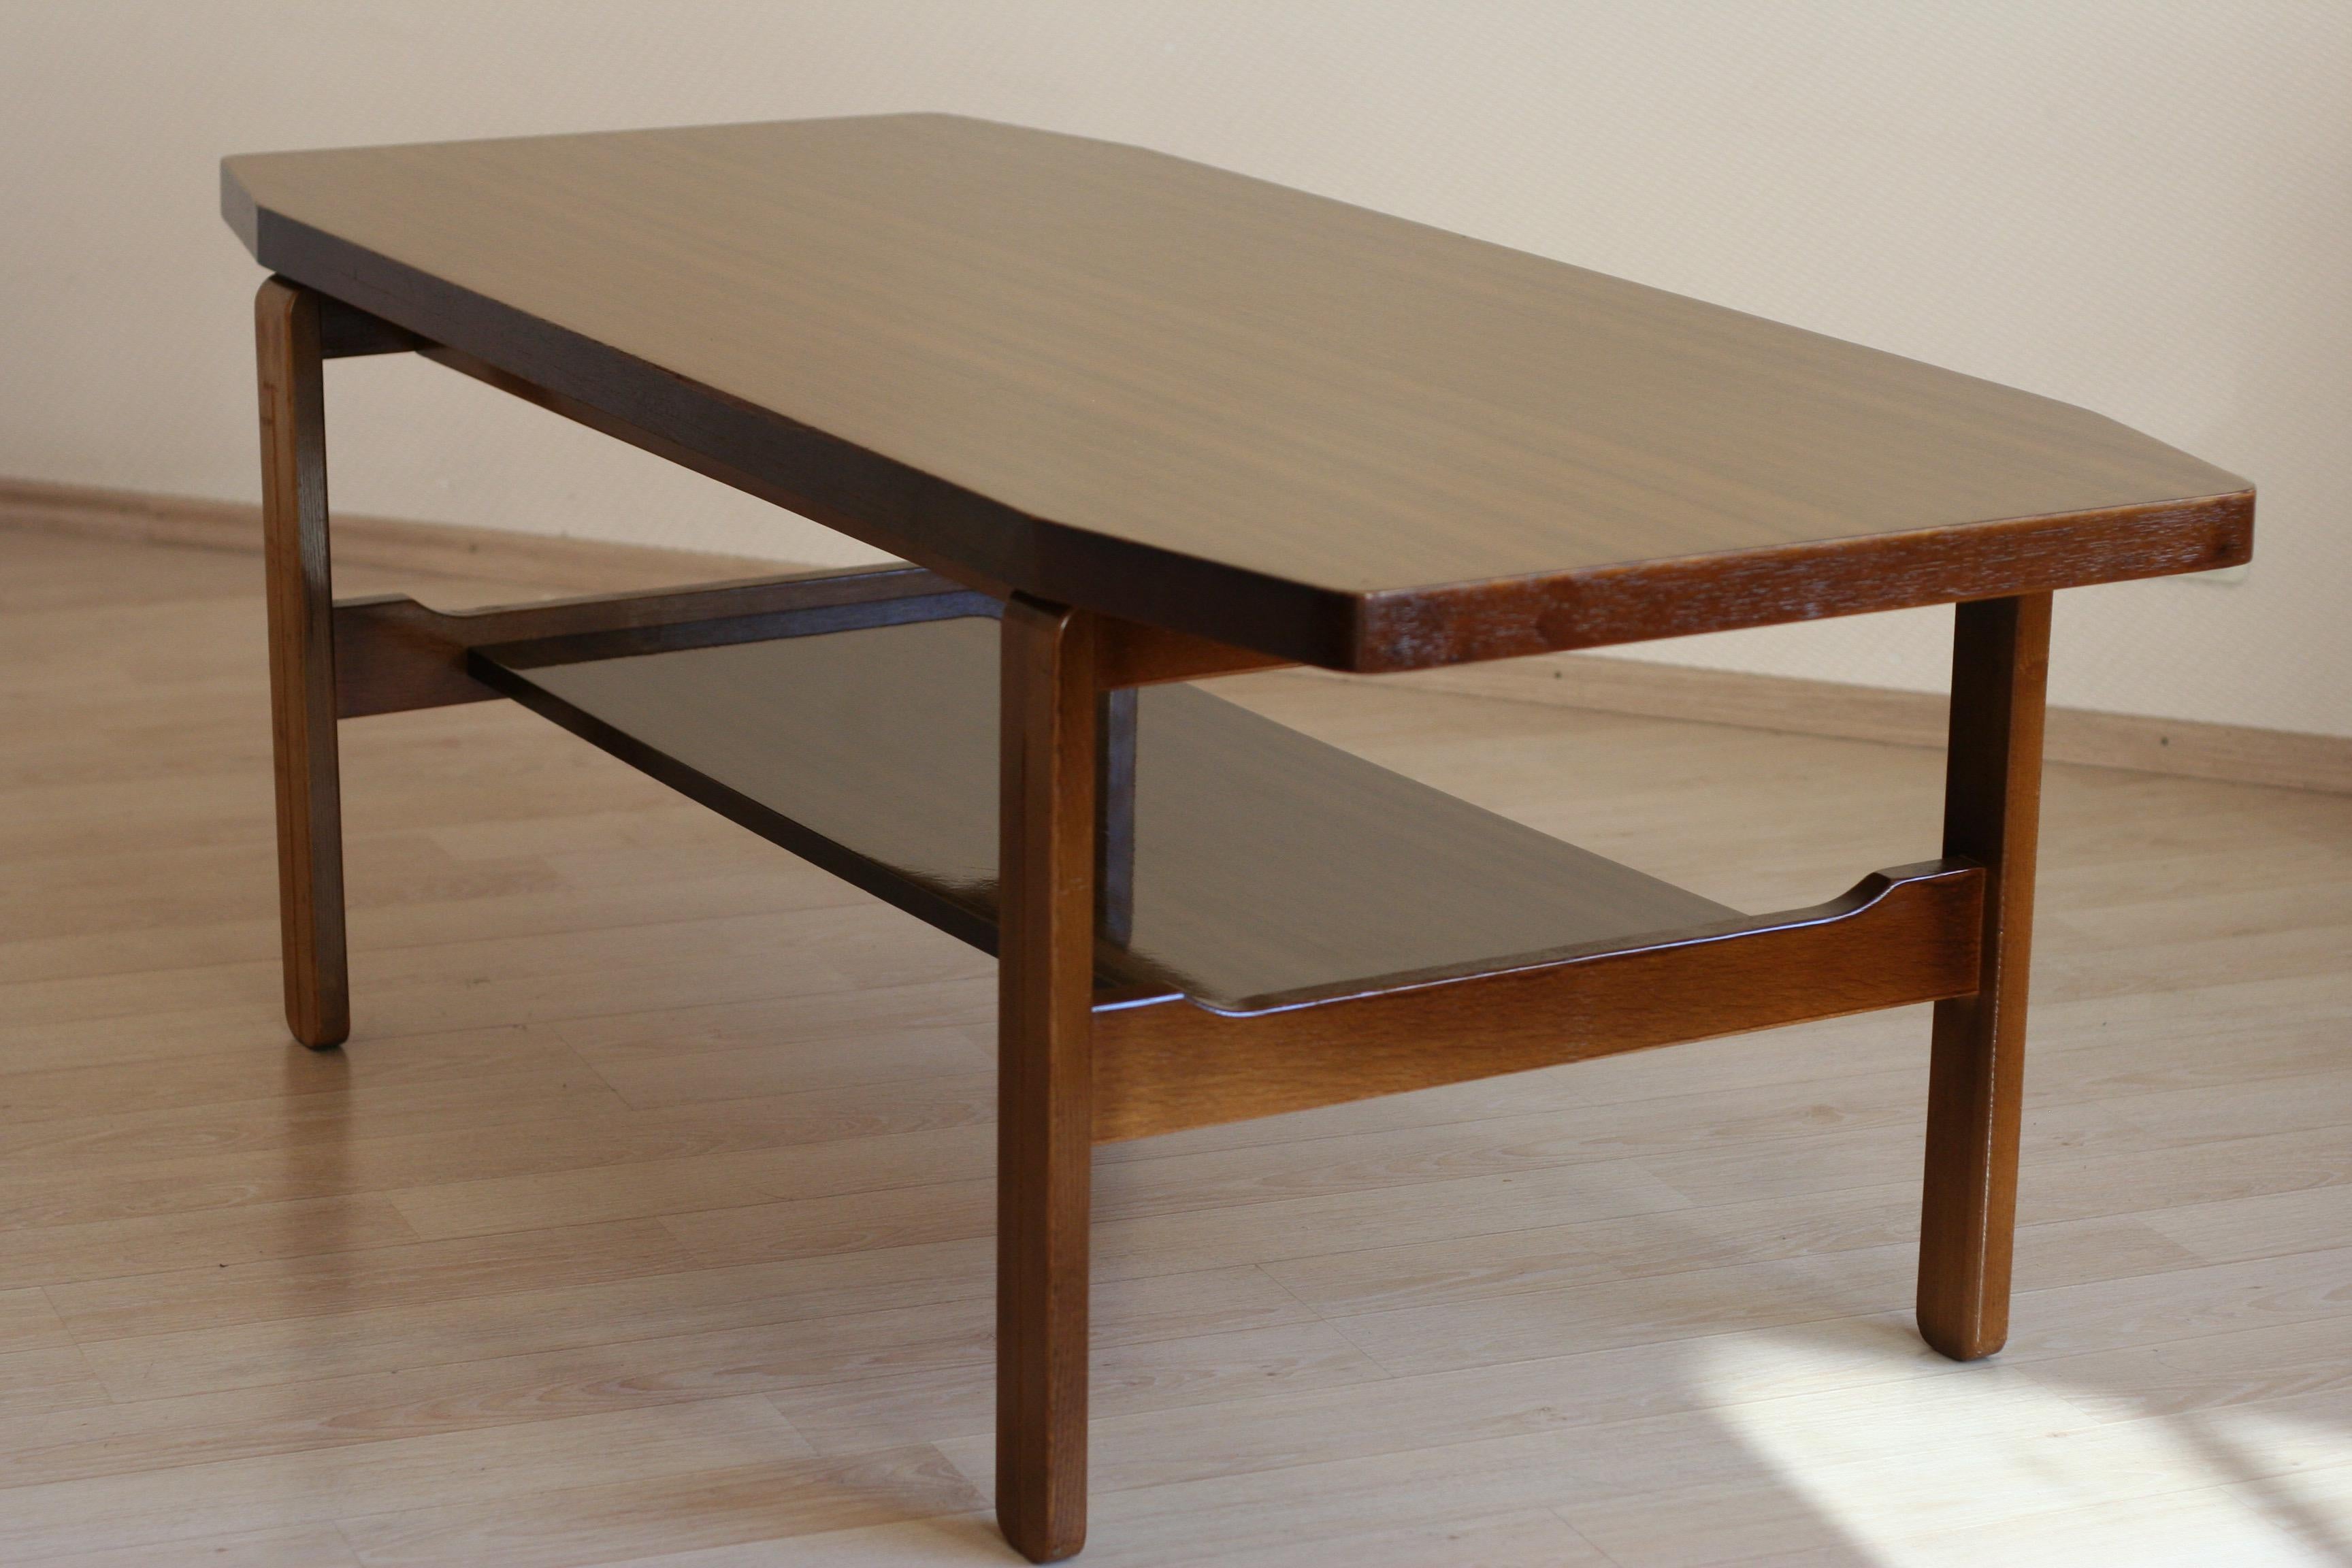 This coffee table features oakwood base and high gloss veneered hardwood desk. The desk is really heavy, so the table is very stabile. Due to uncommon hexagon form and no acute angles this coffee table looks very light in the room despite its quite